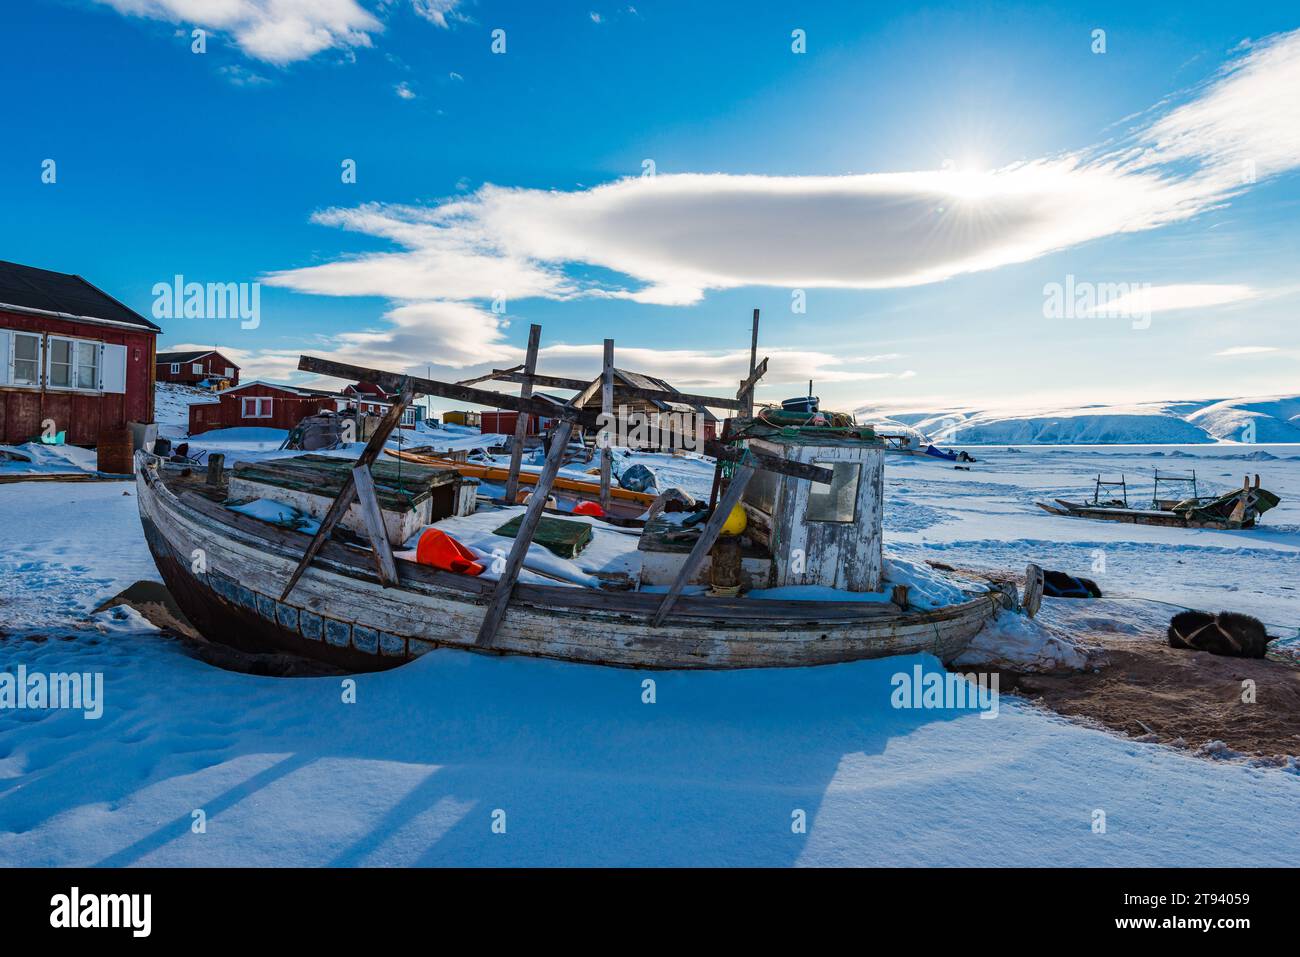 Abandoned shipwreck in snowy coastal waters during winter season. Stock Photo